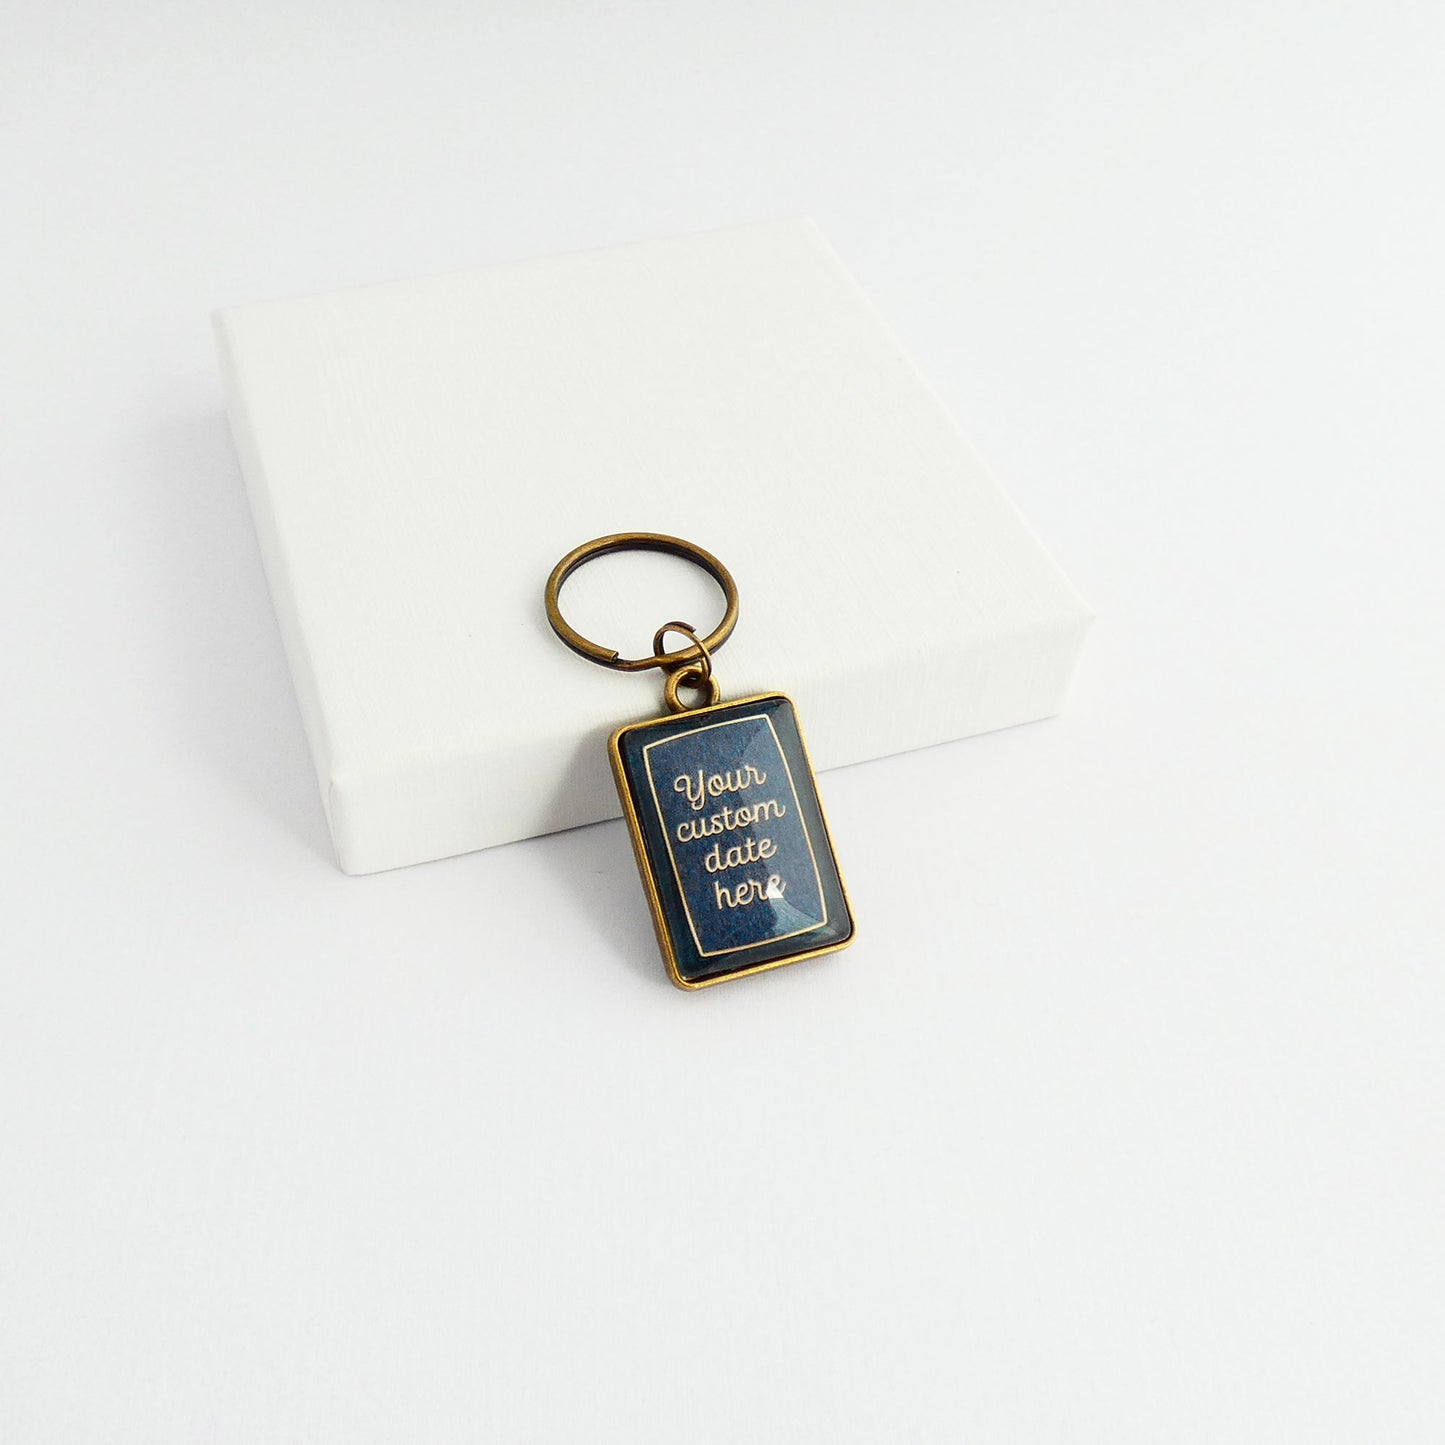 A double sided bronze and navy blue rectangle keyrings showing the back side with words 'Your custom date here'